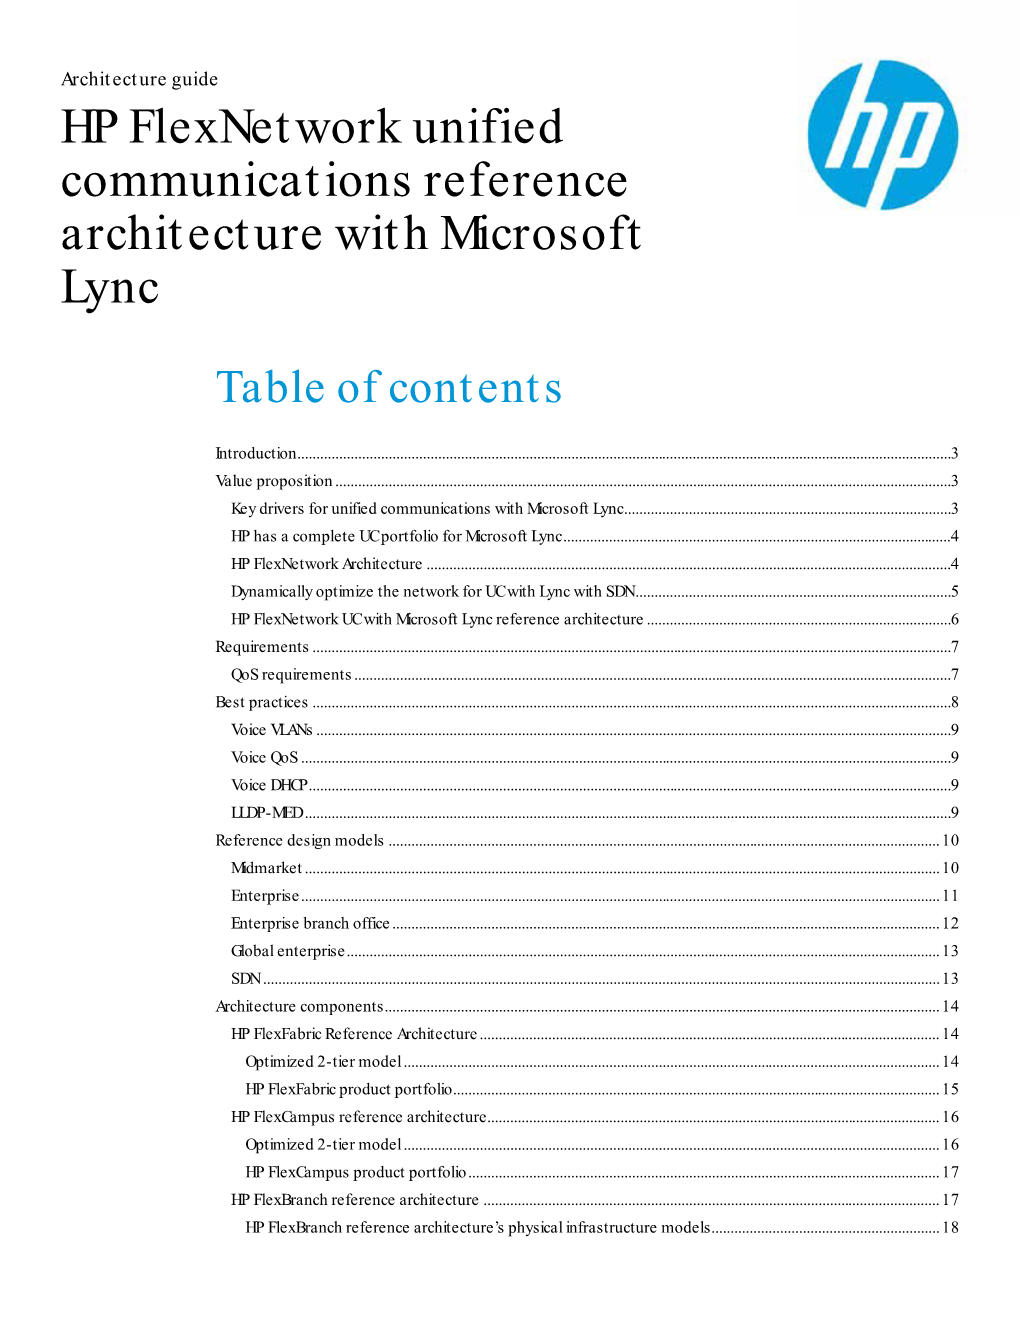 HP Flexnetwork Unified Communications Reference Architecture with Microsoft Lync